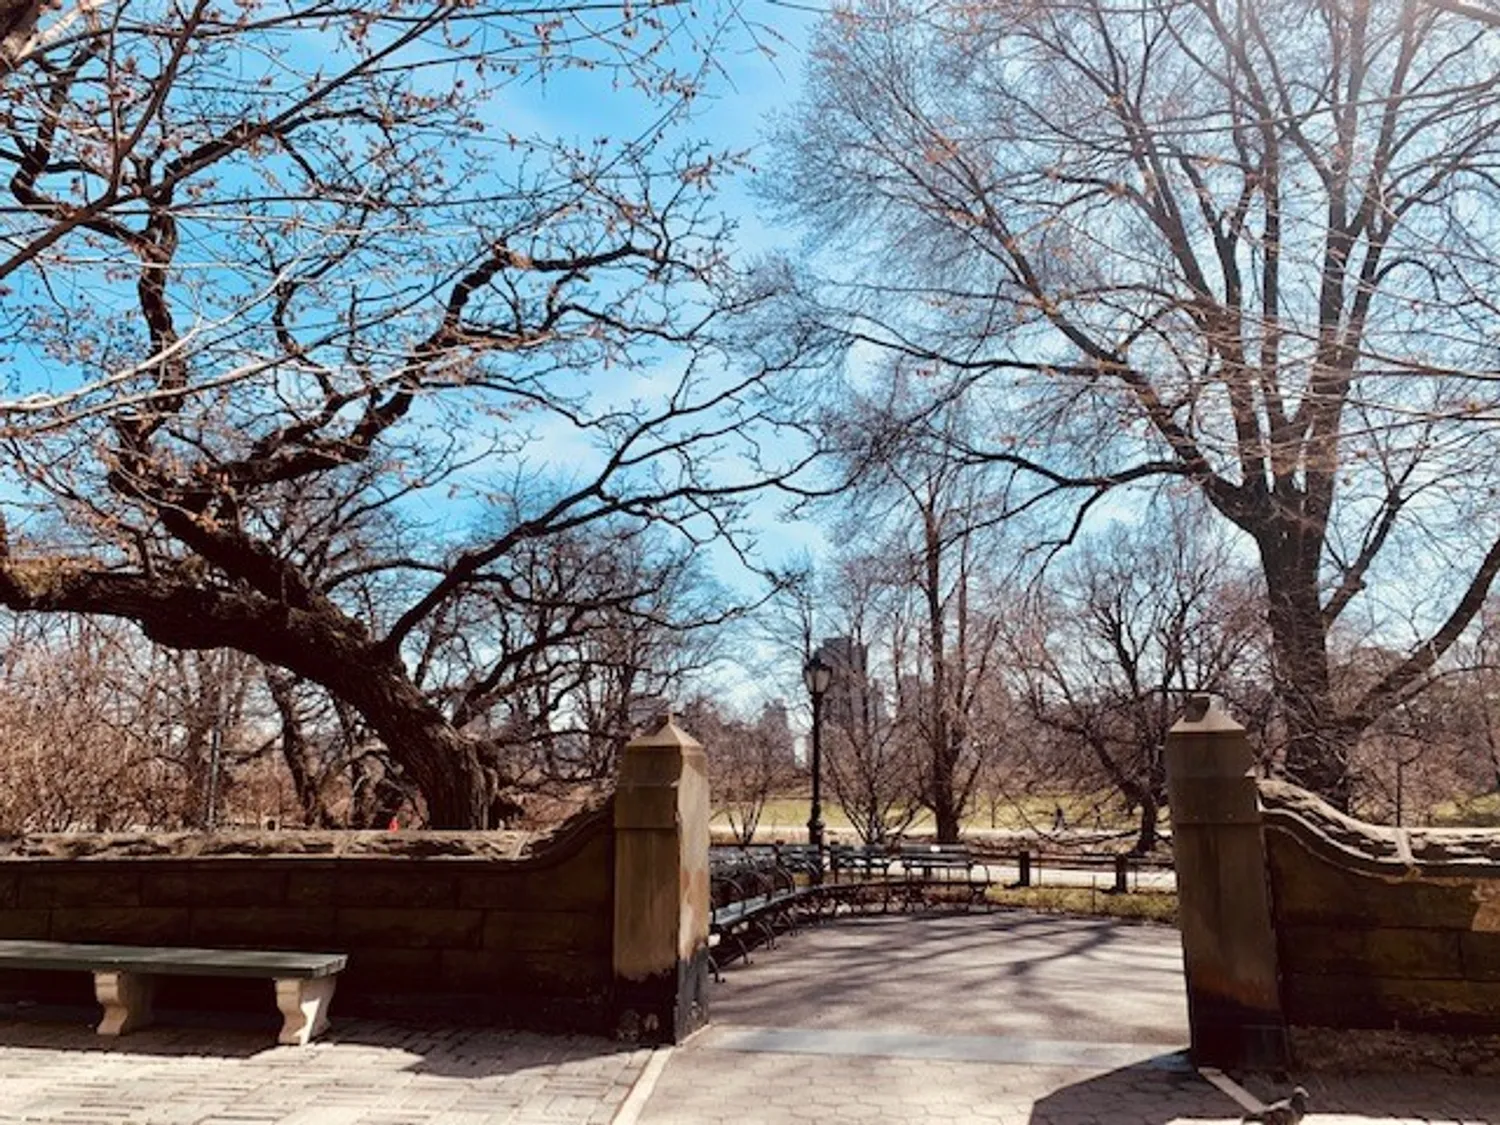 Central Park Entrance at 90th St